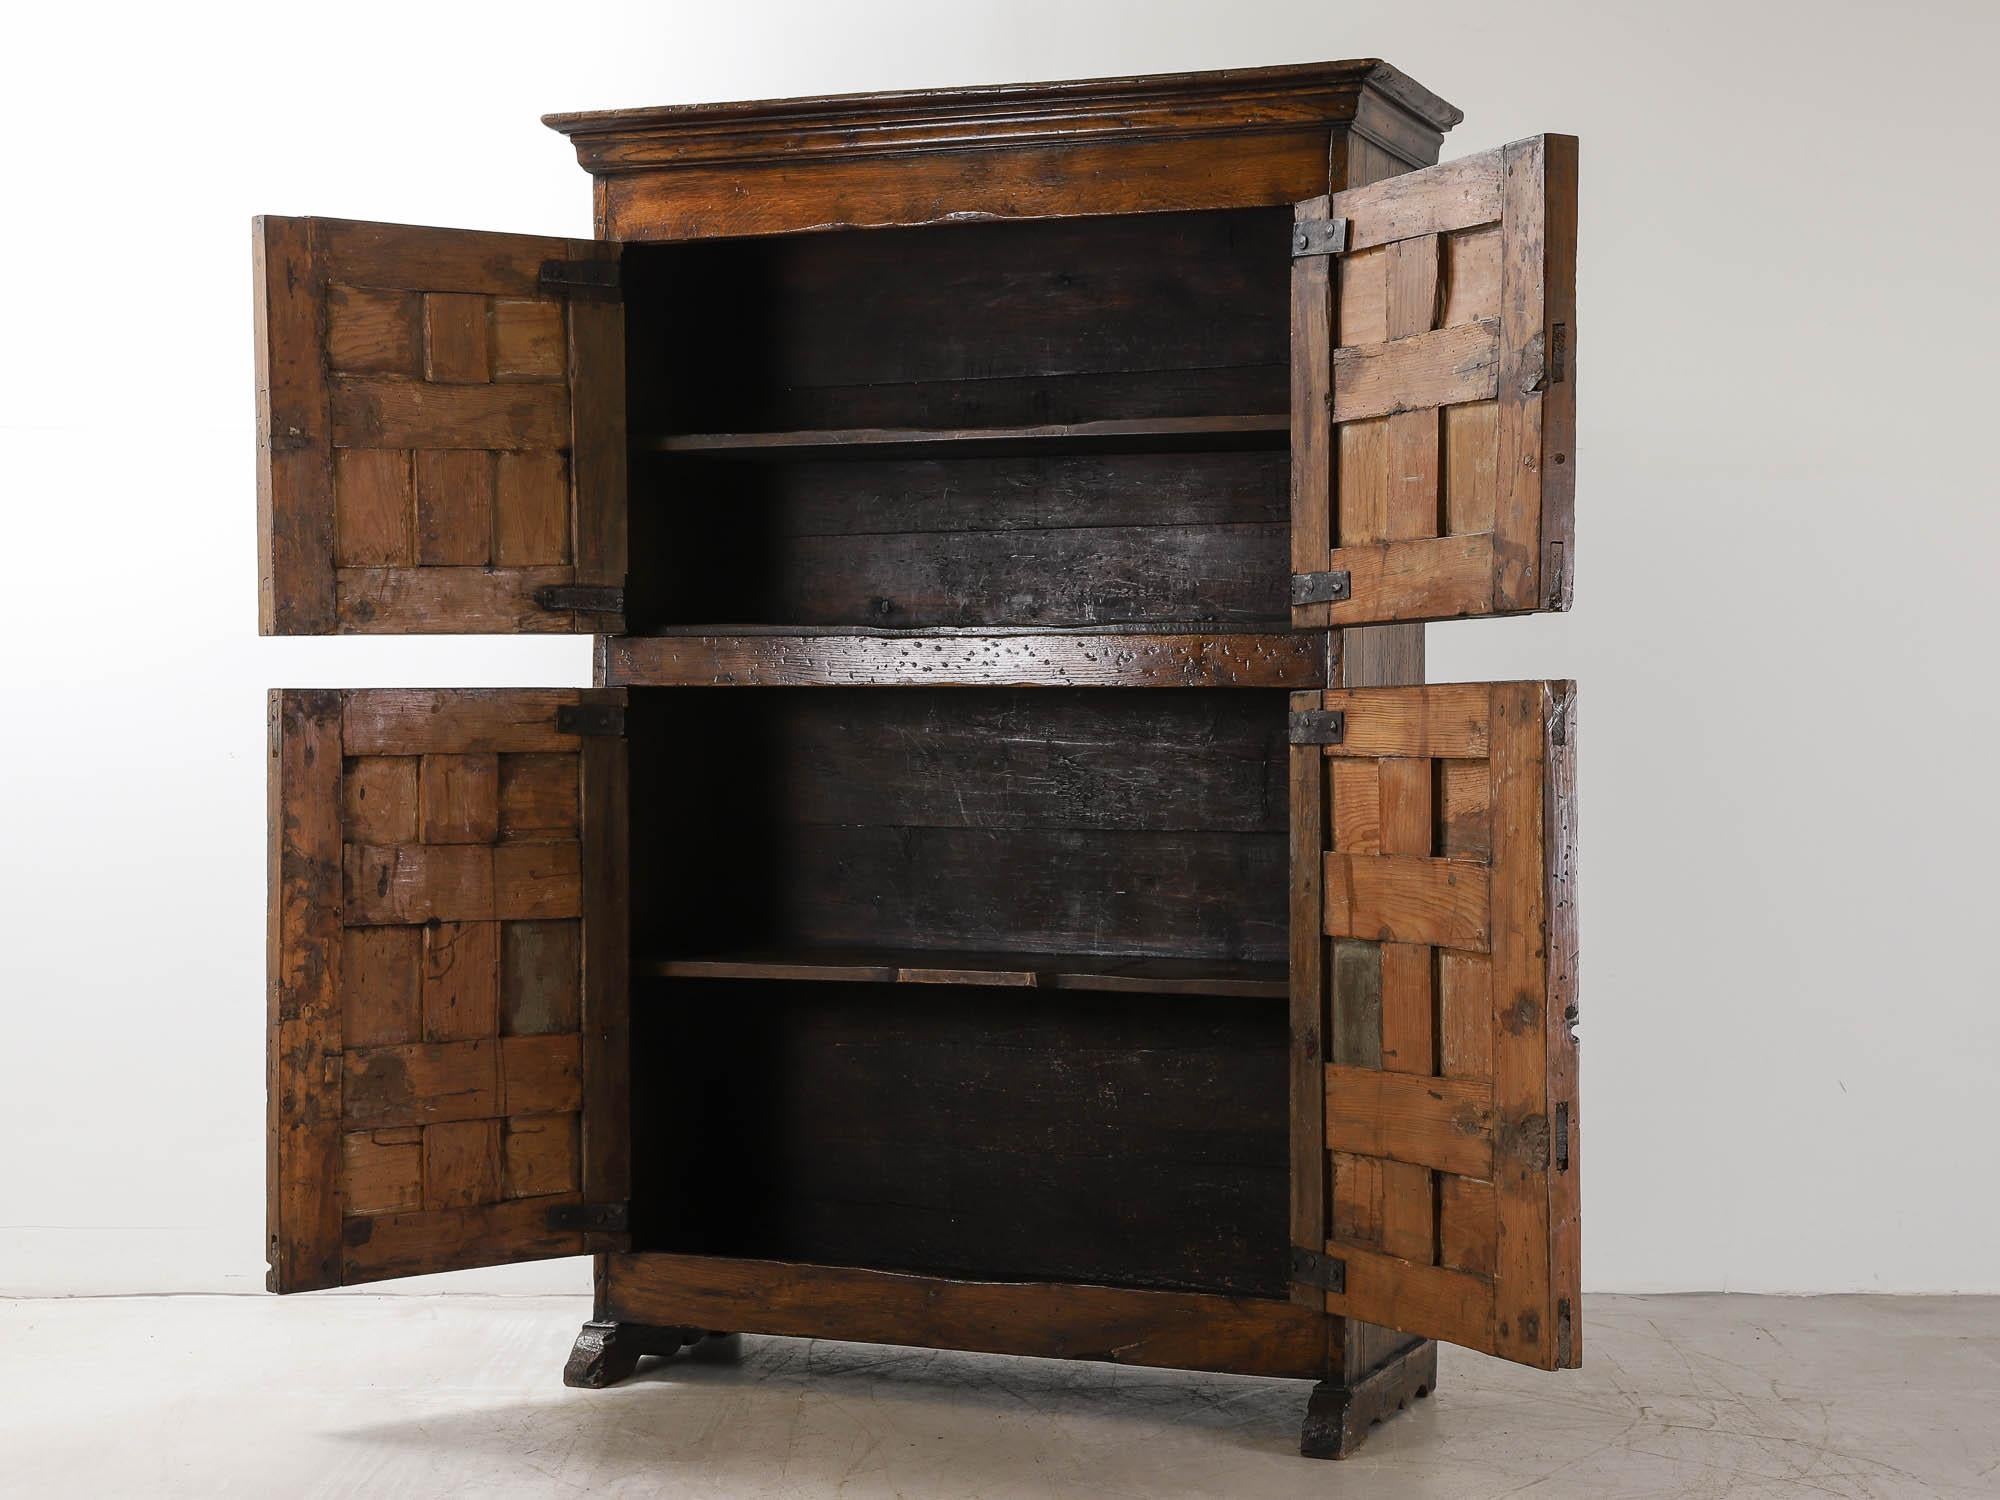 This substantial 19th Century Northern Spanish cabinet in oak and pine was most likely originally used as kitchen storage - with four geometrically carved panel doors, original iron hinges, internal shelves, standing on a plinth base. The piece is